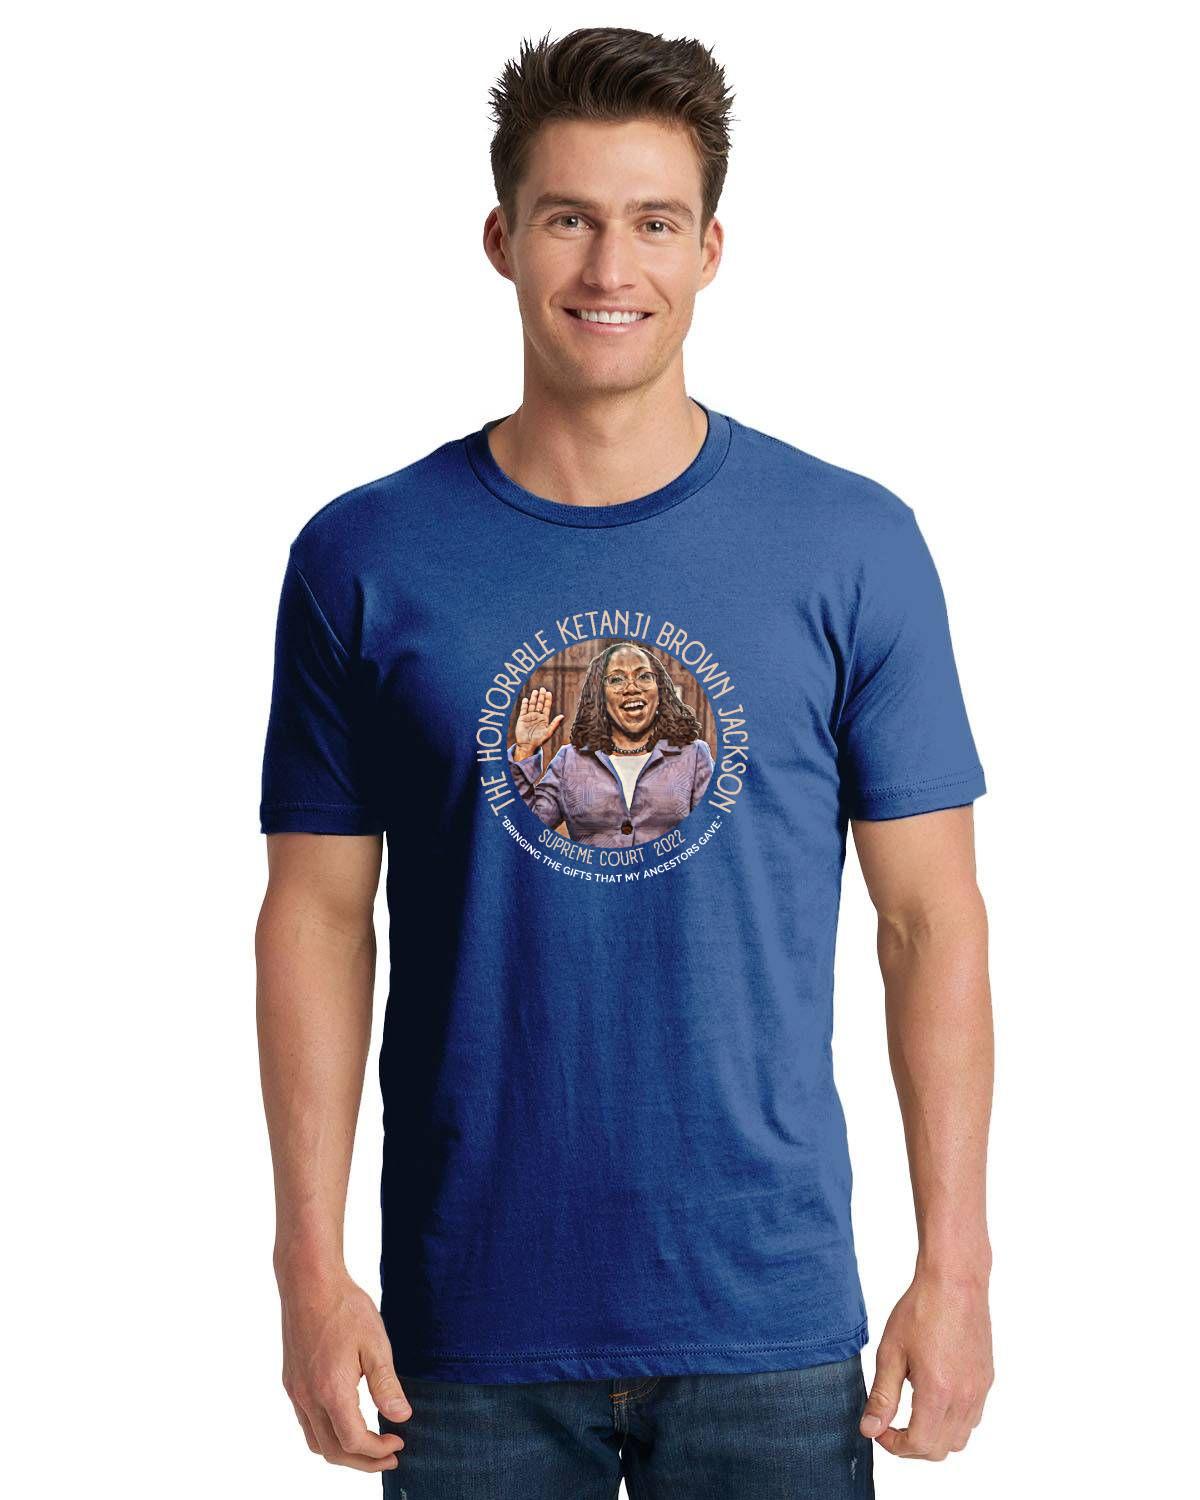 Celebrate Black Excellence with our Ketanji Brown T-Shirt - Supporting Healing Justice SB!